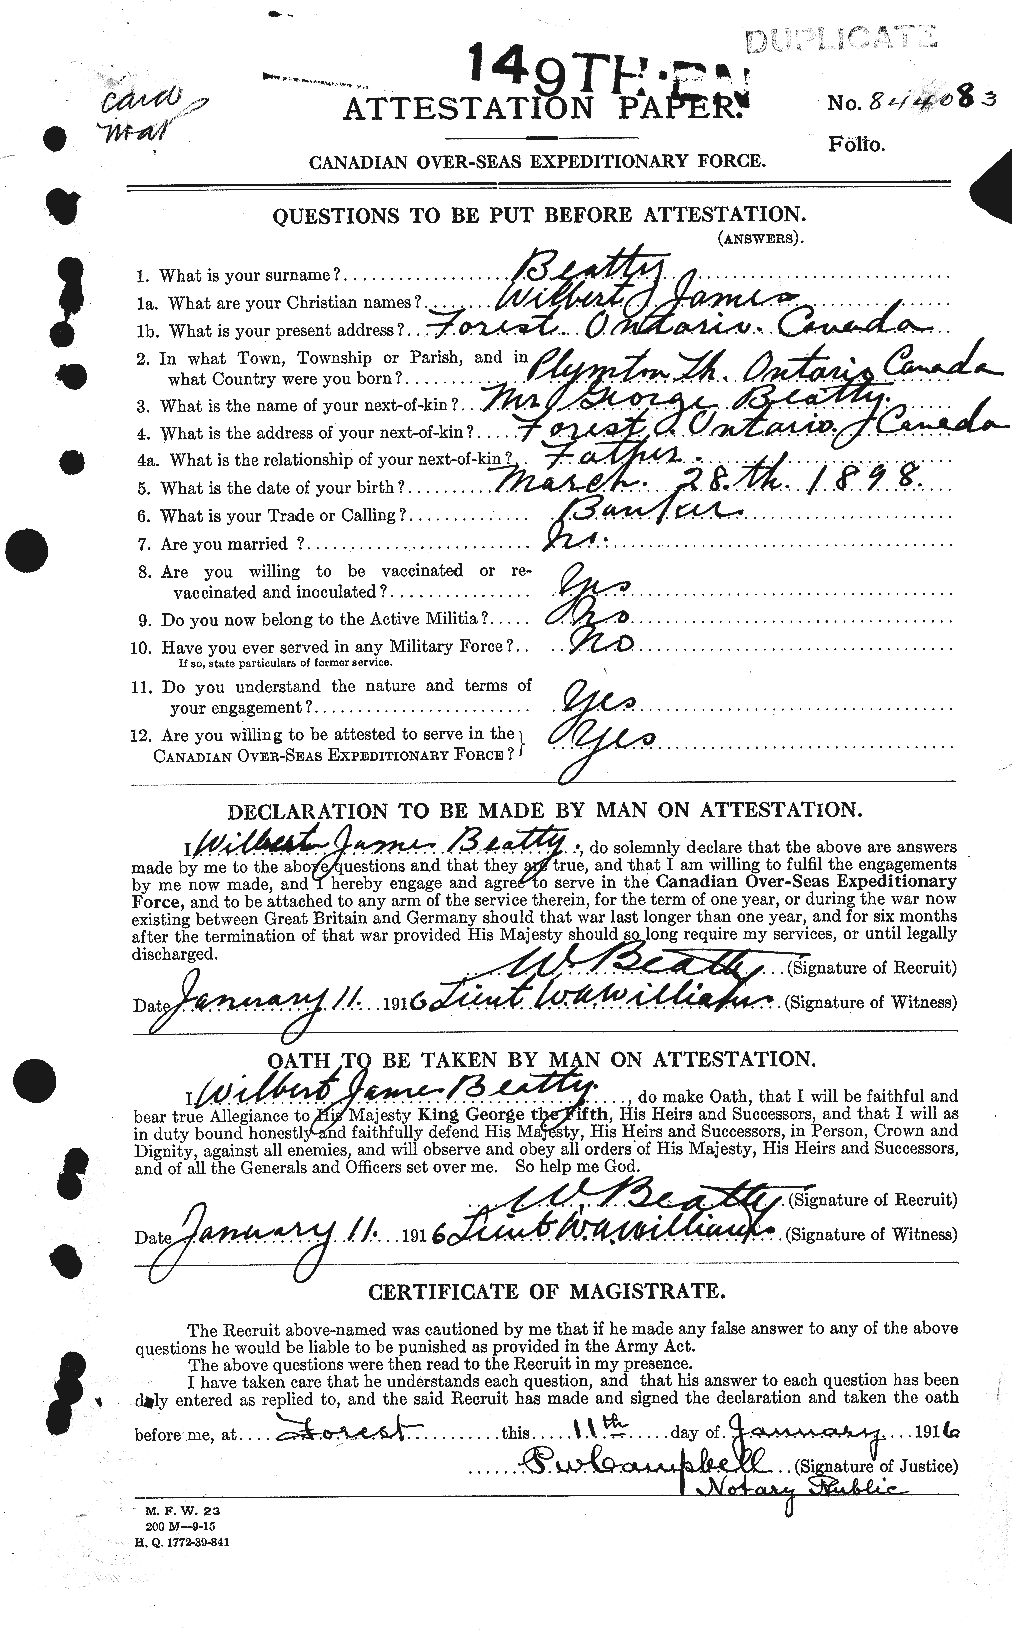 Personnel Records of the First World War - CEF 236451a